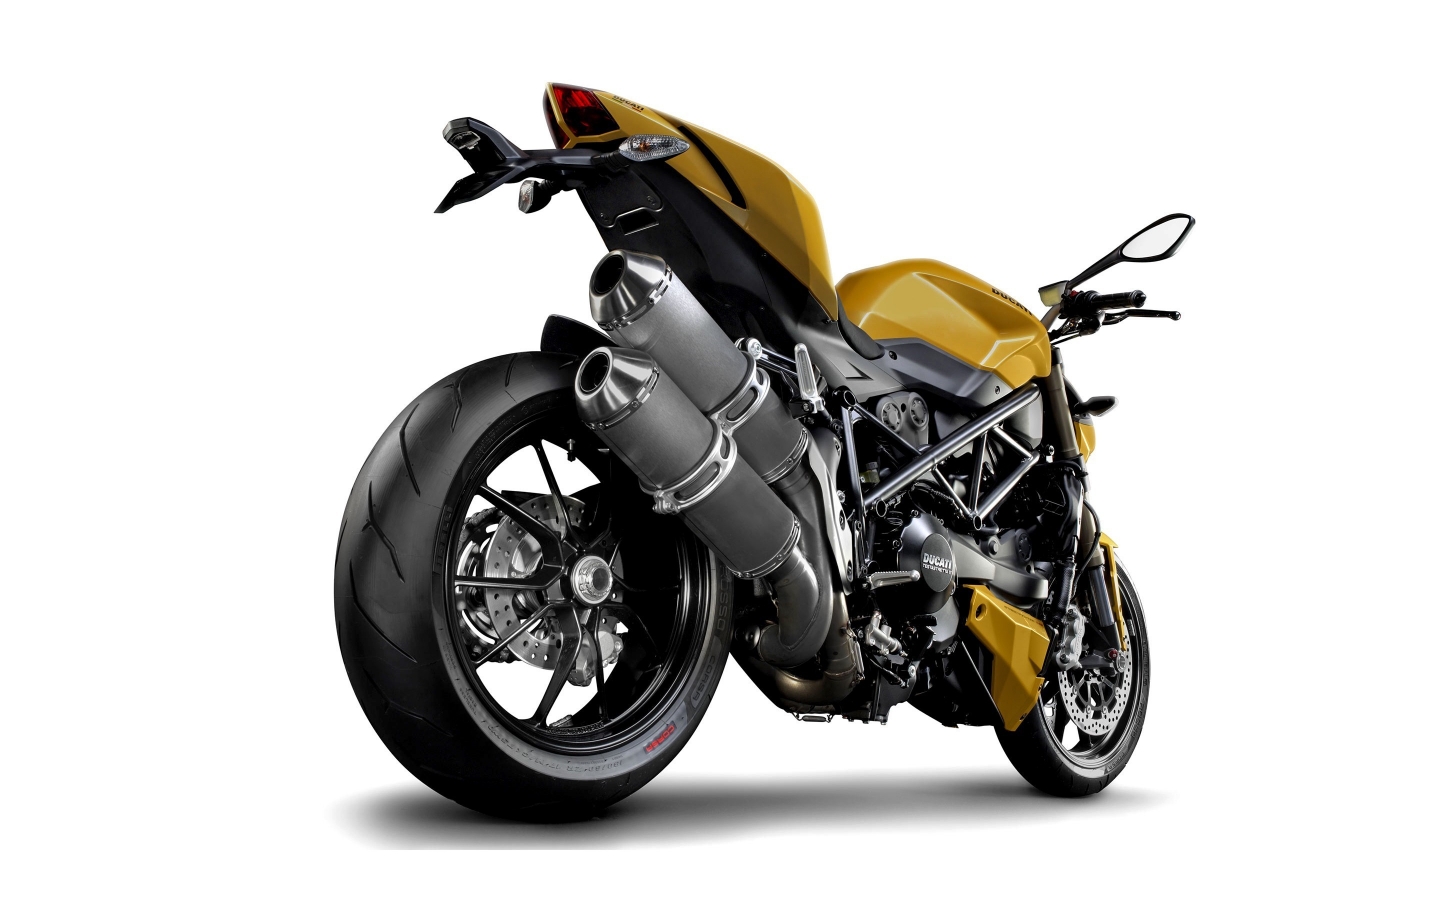  Ducati Streetfighter Rear for 1440 x 900 widescreen resolution